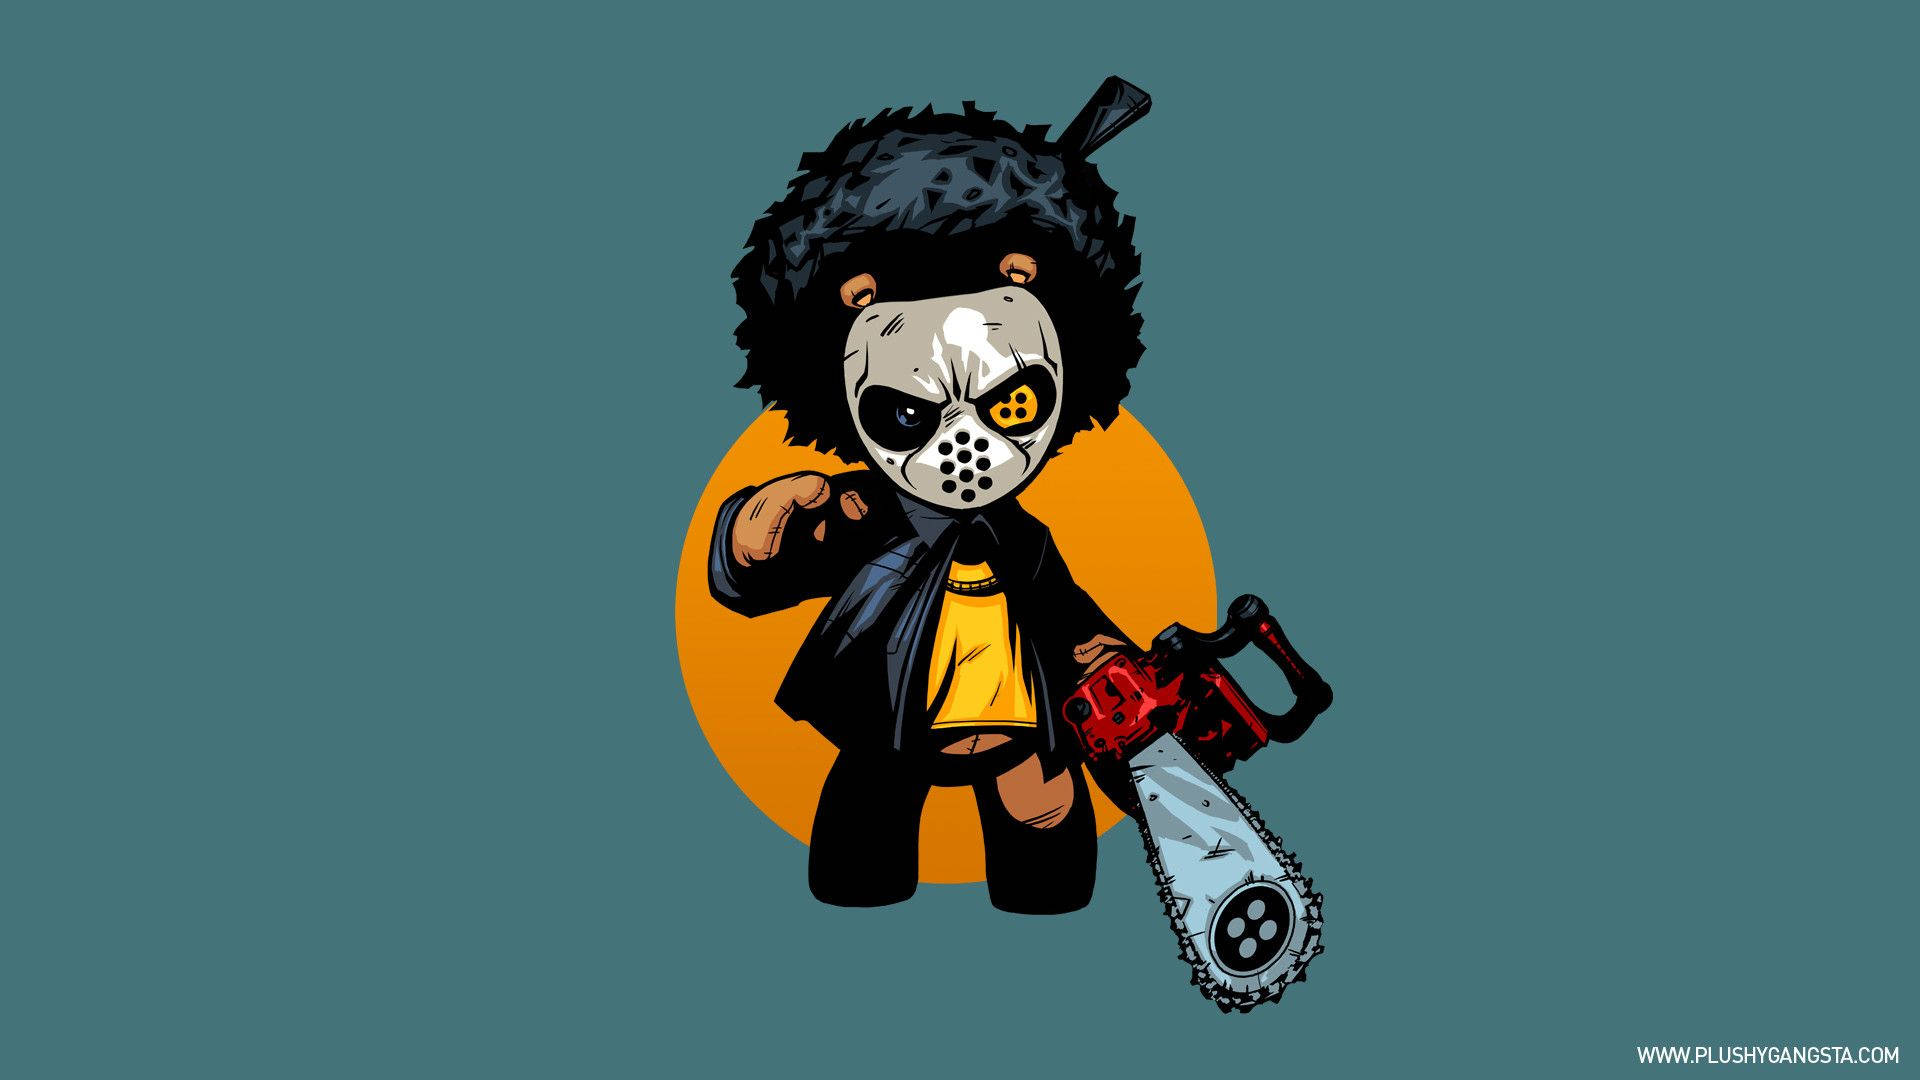 Cartoon teddy bear with chainsaw and mask wallpaper.